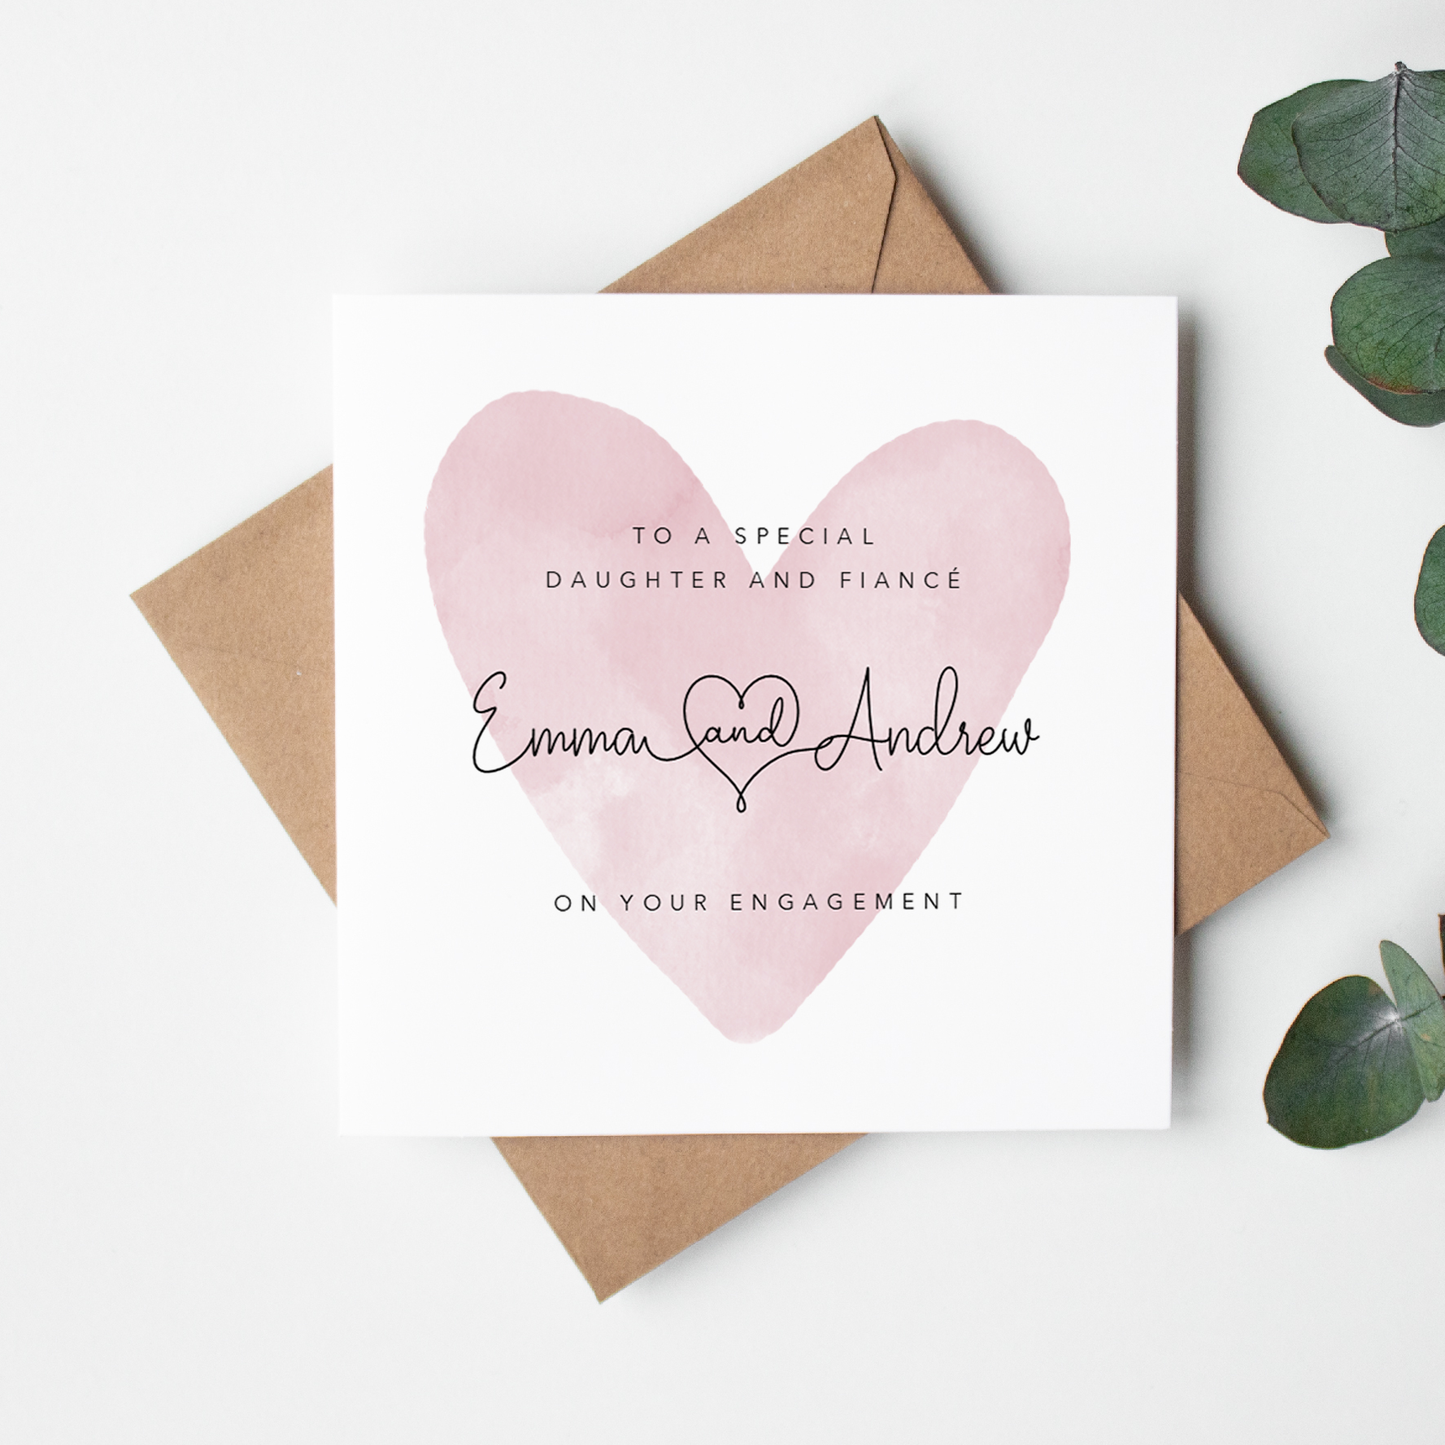 Sweet Love Engagement Card for Daughter and Fiance/Fiancee